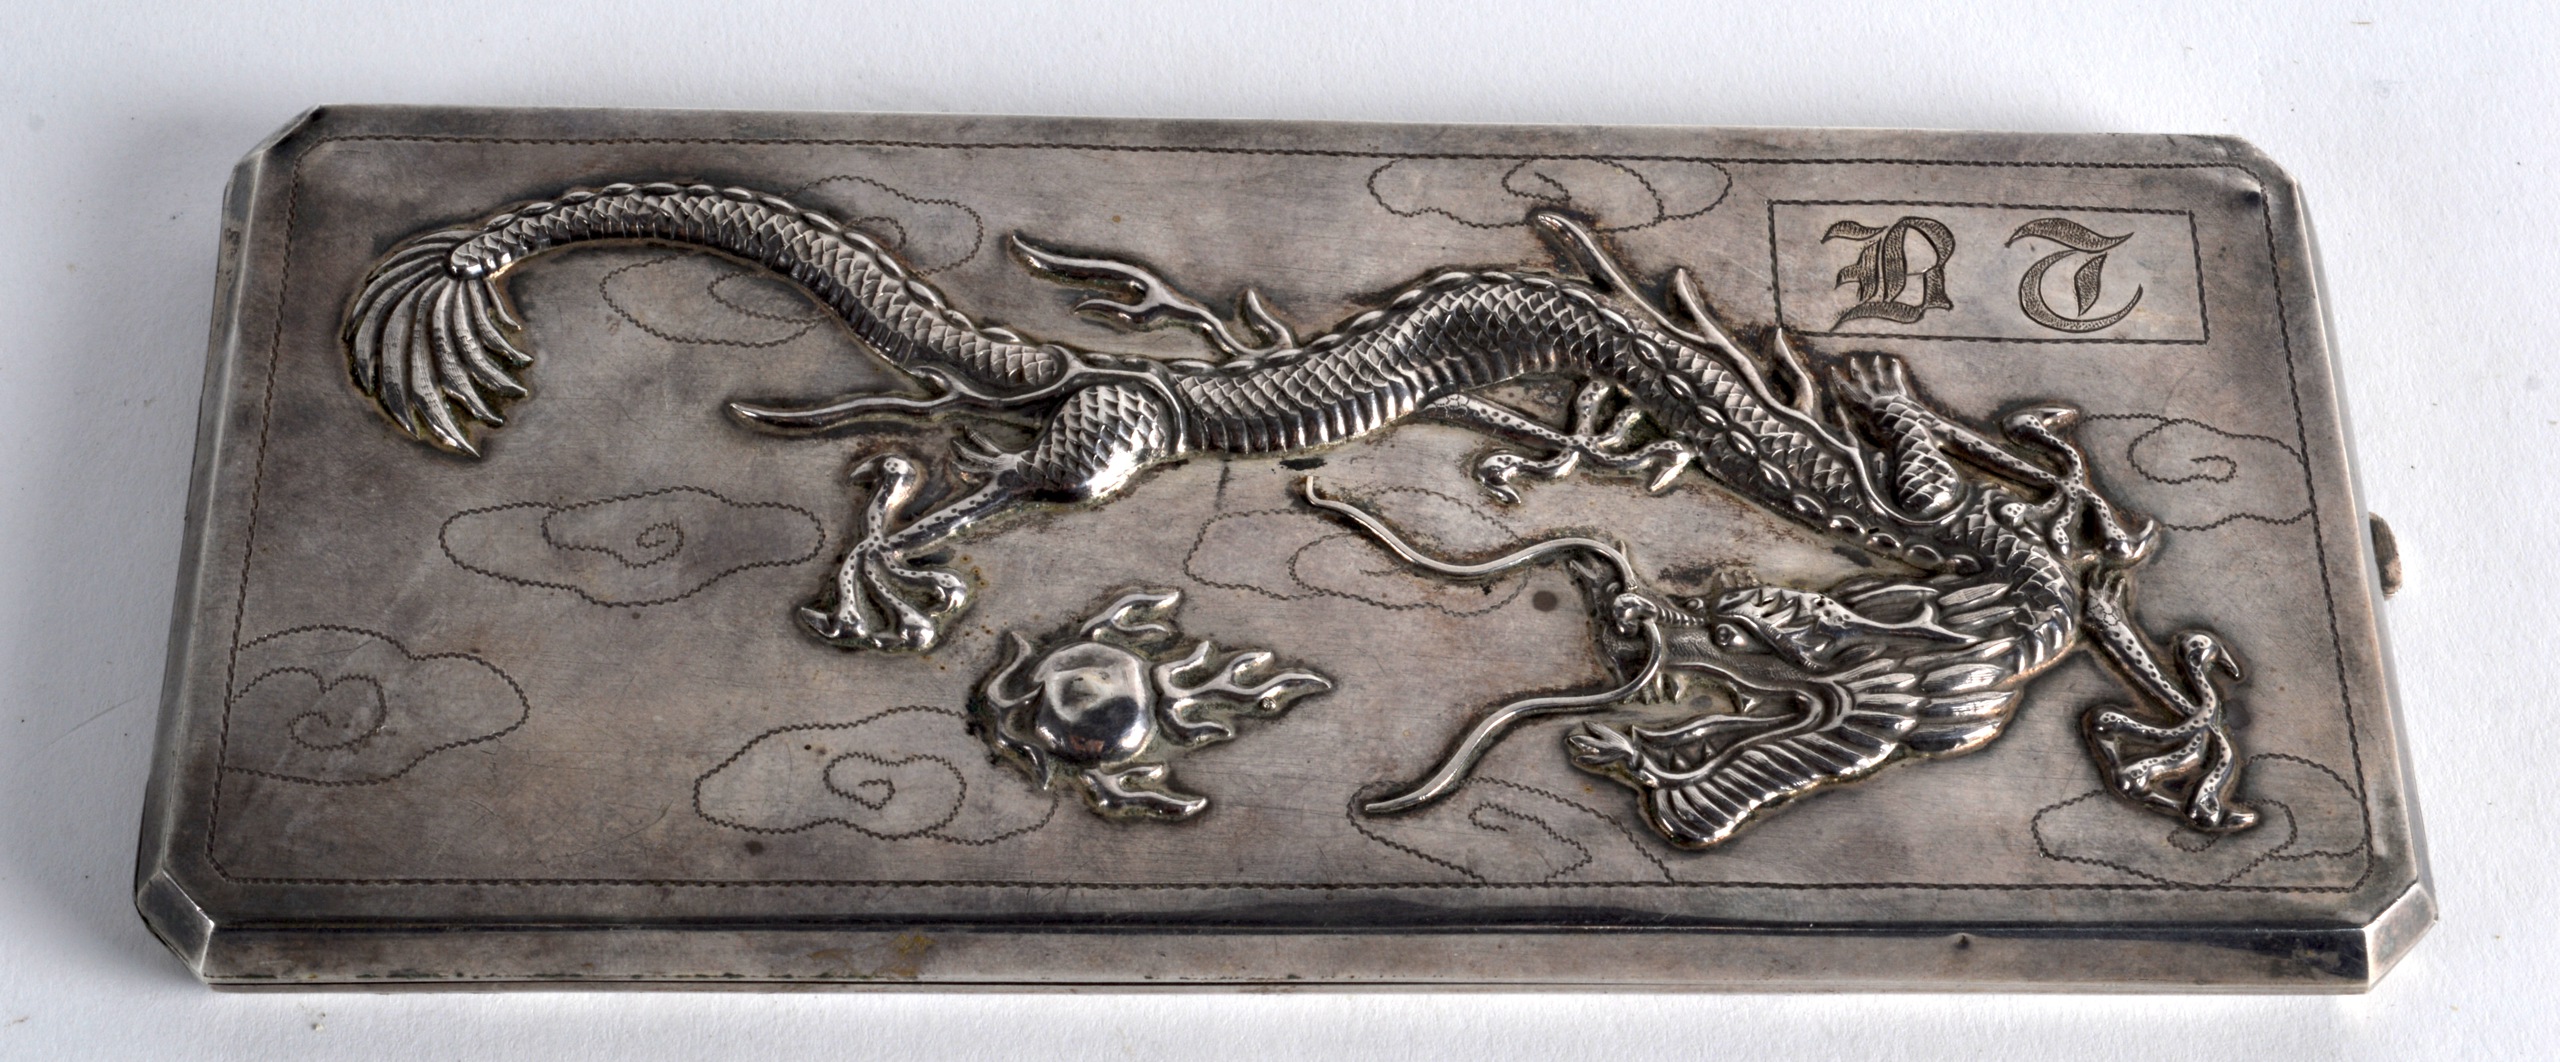 AN UNUSUAL LATE 19TH CENTURY JAPANESE MEIJI PERIOD SILVER CASE decorated in relief with dragons - Image 2 of 2